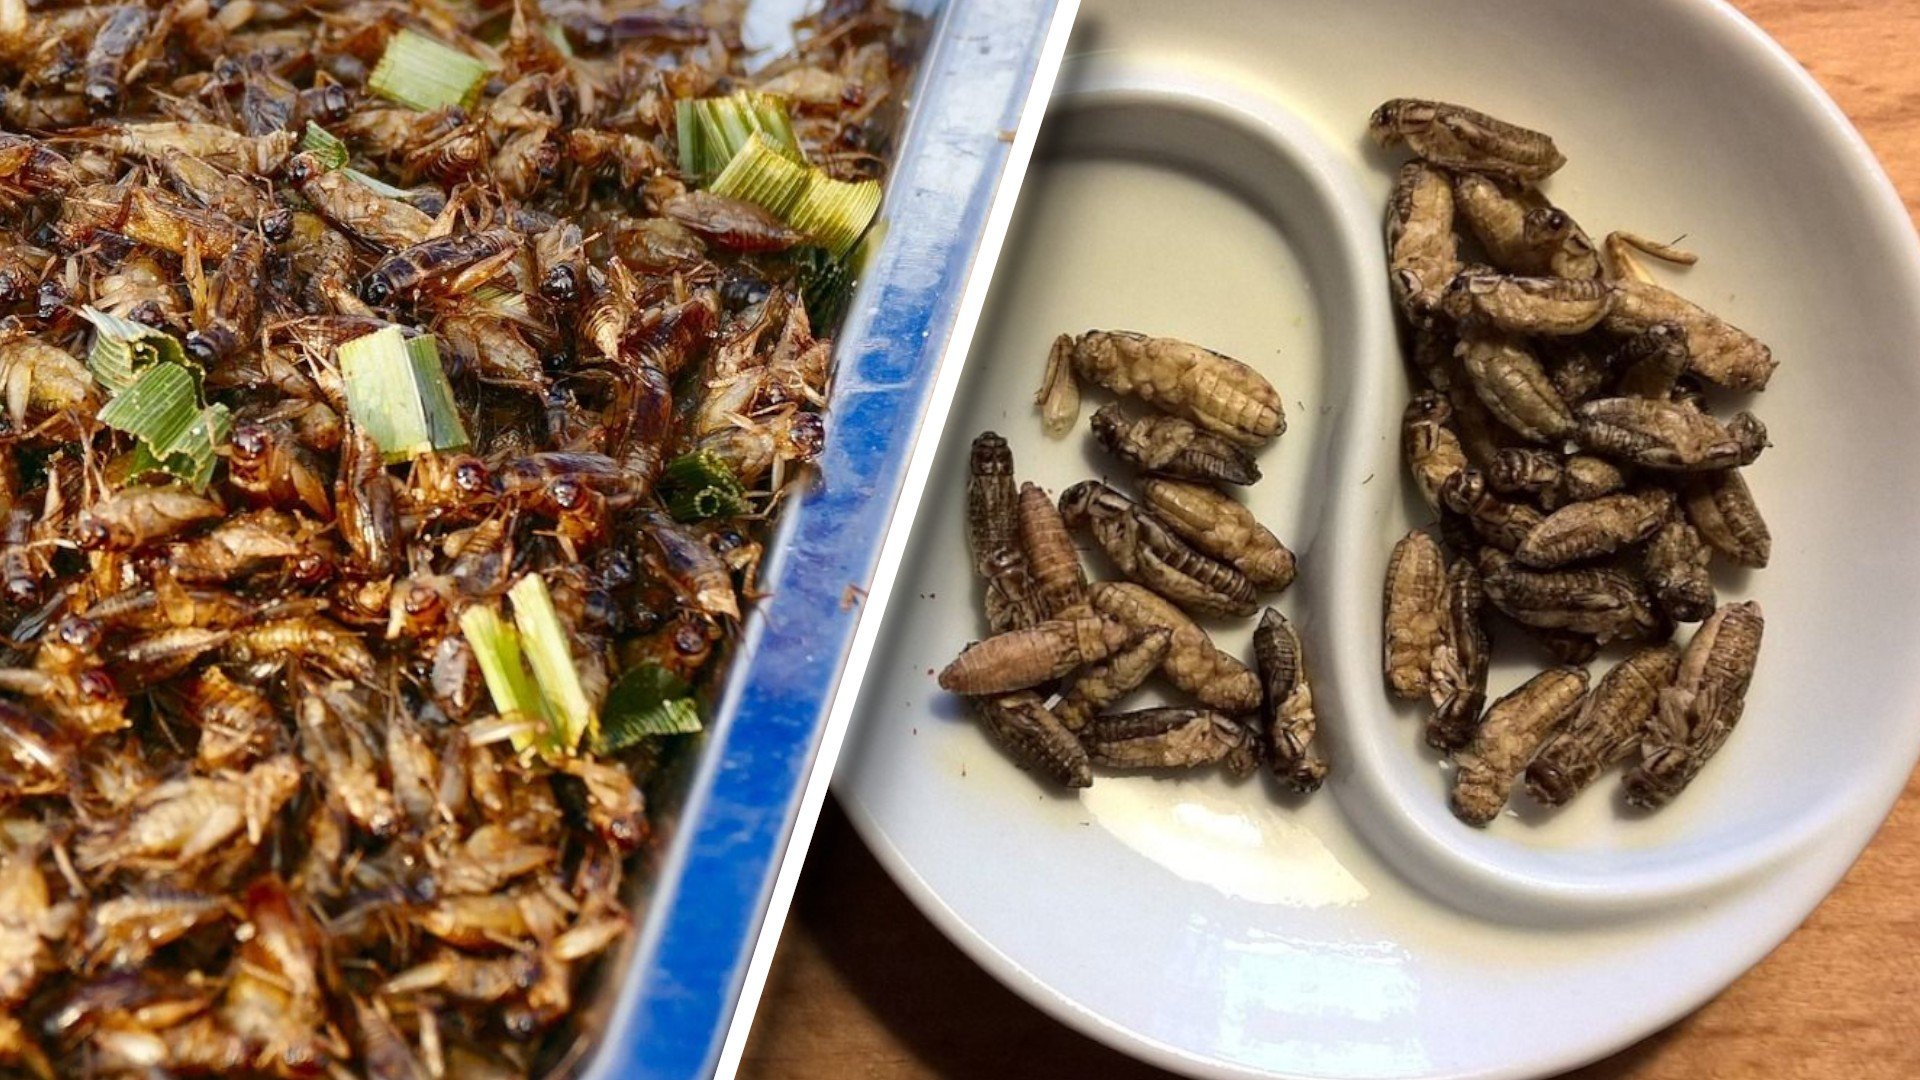 Insects are supposed to be the food of the future.  Is eating insects harmful?  This is what scientists say [26.02.2023]